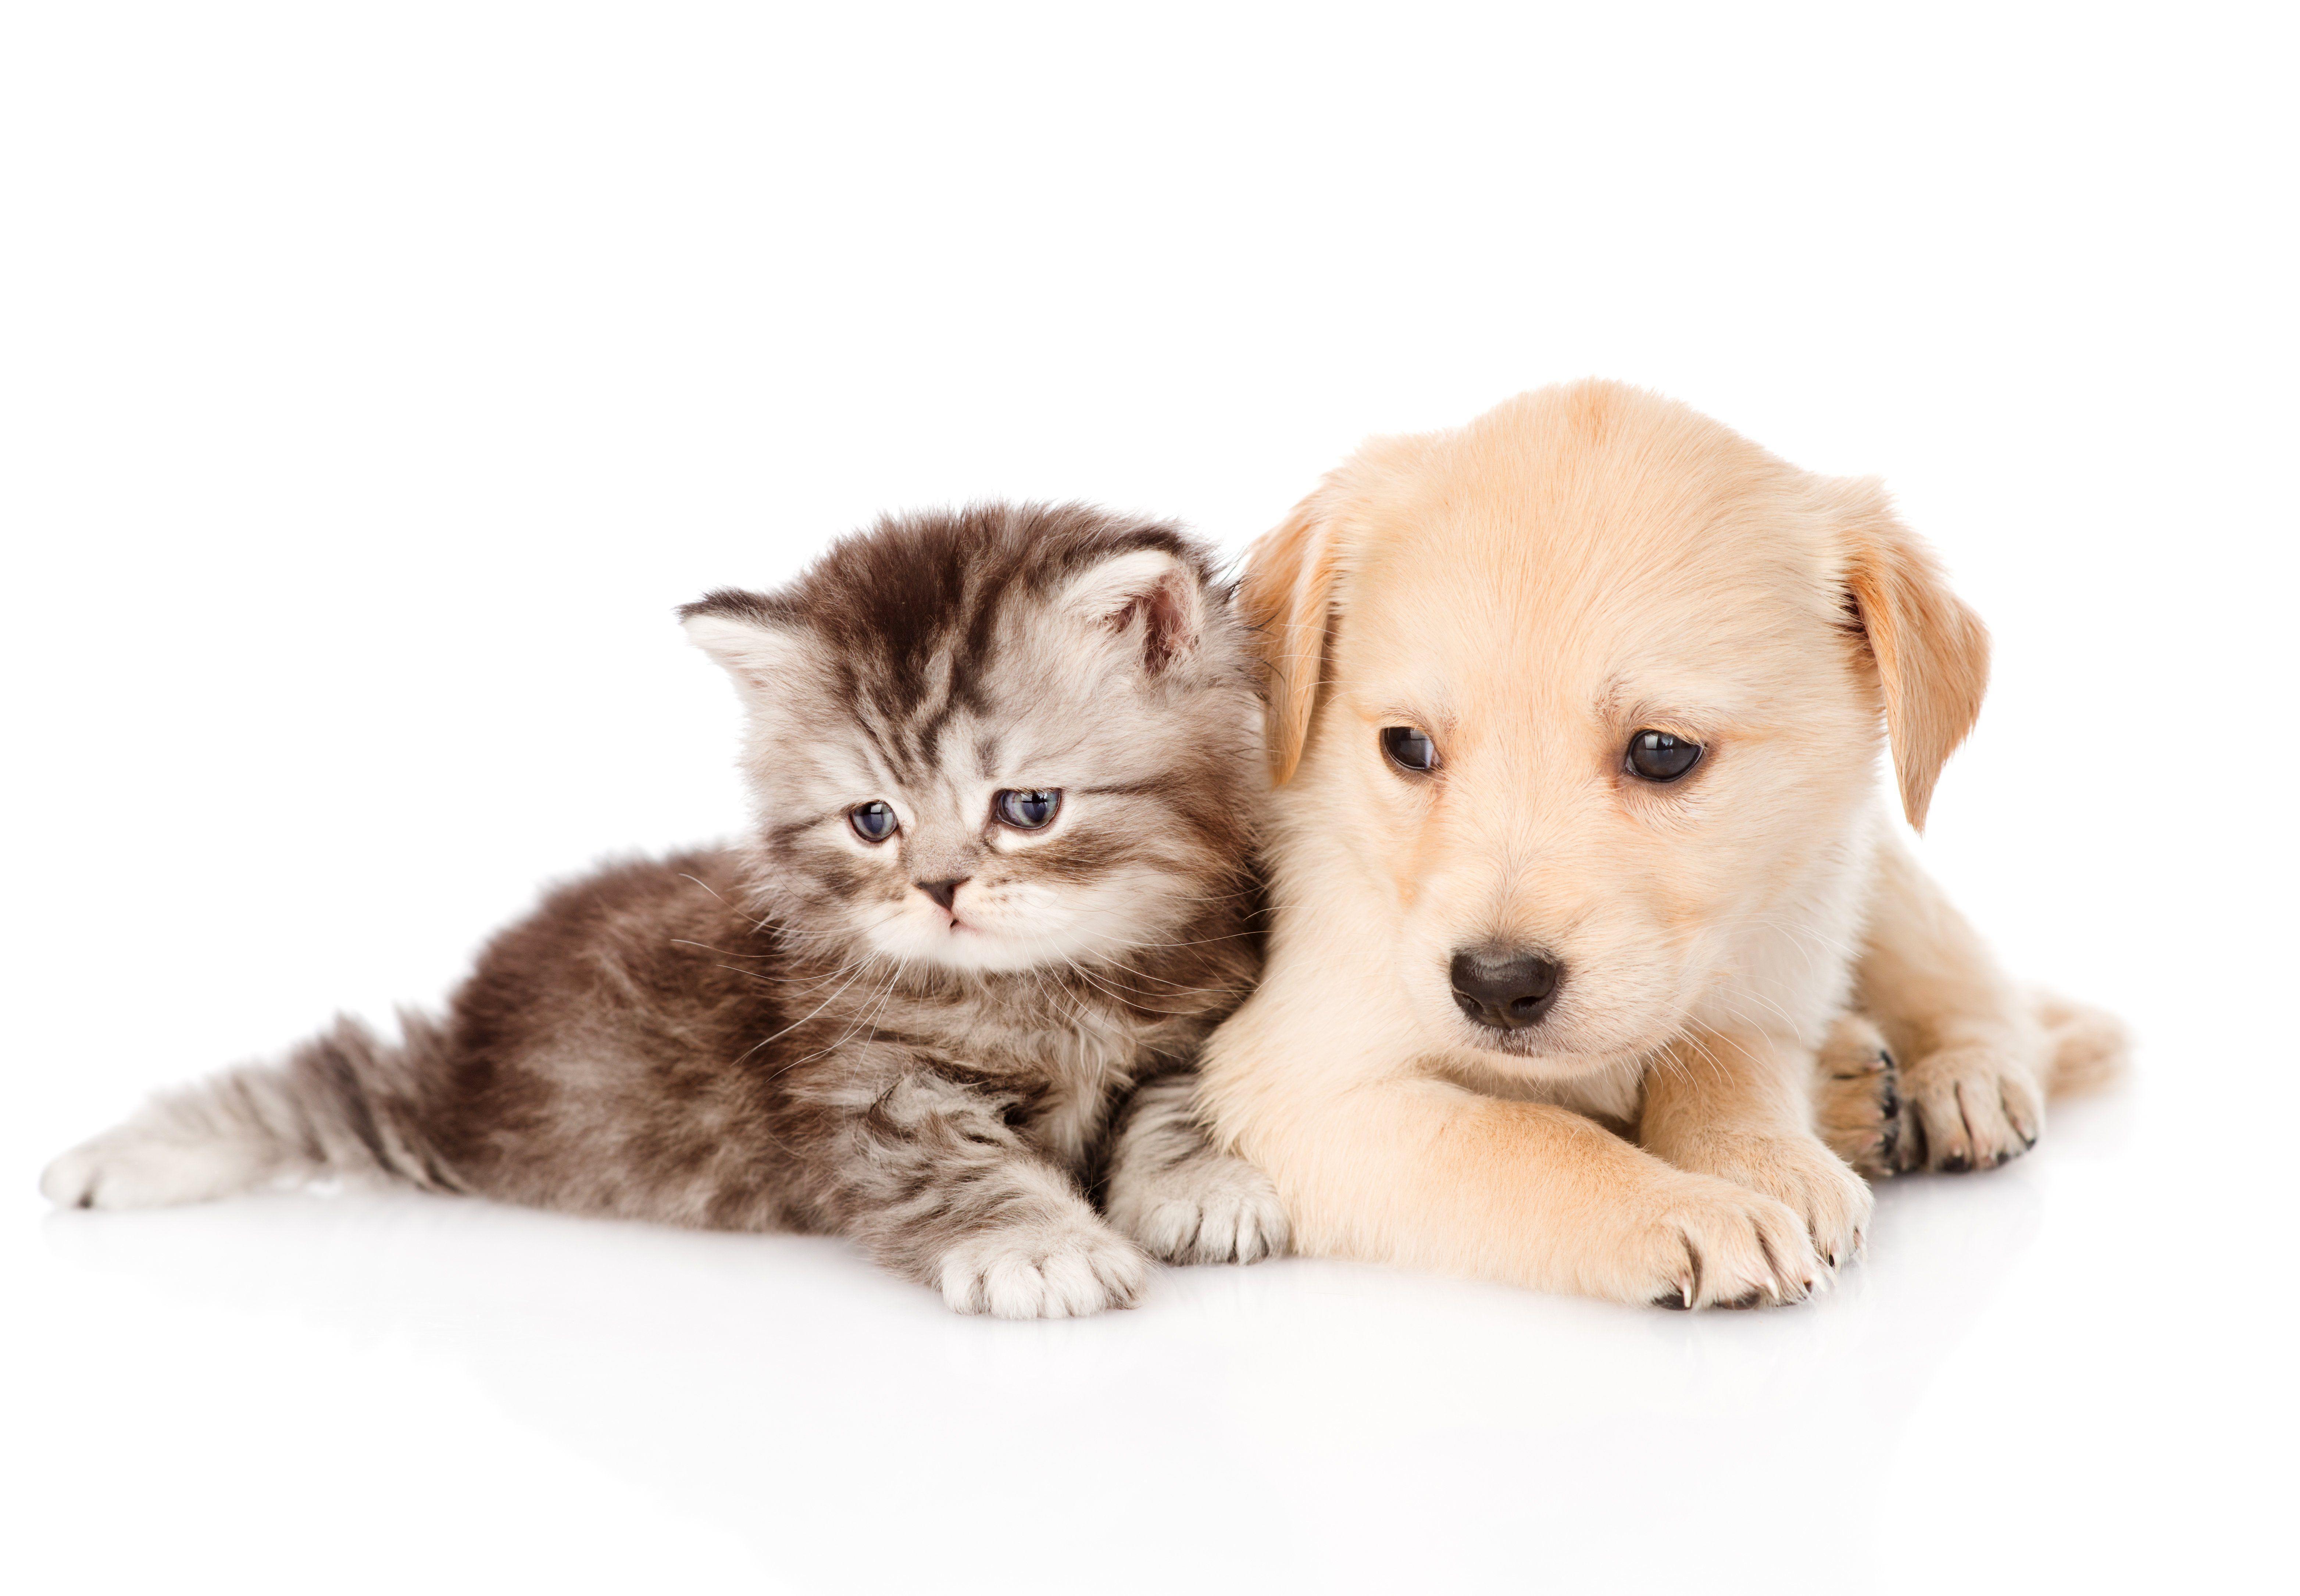 Cute Dog and Cat Wallpapers